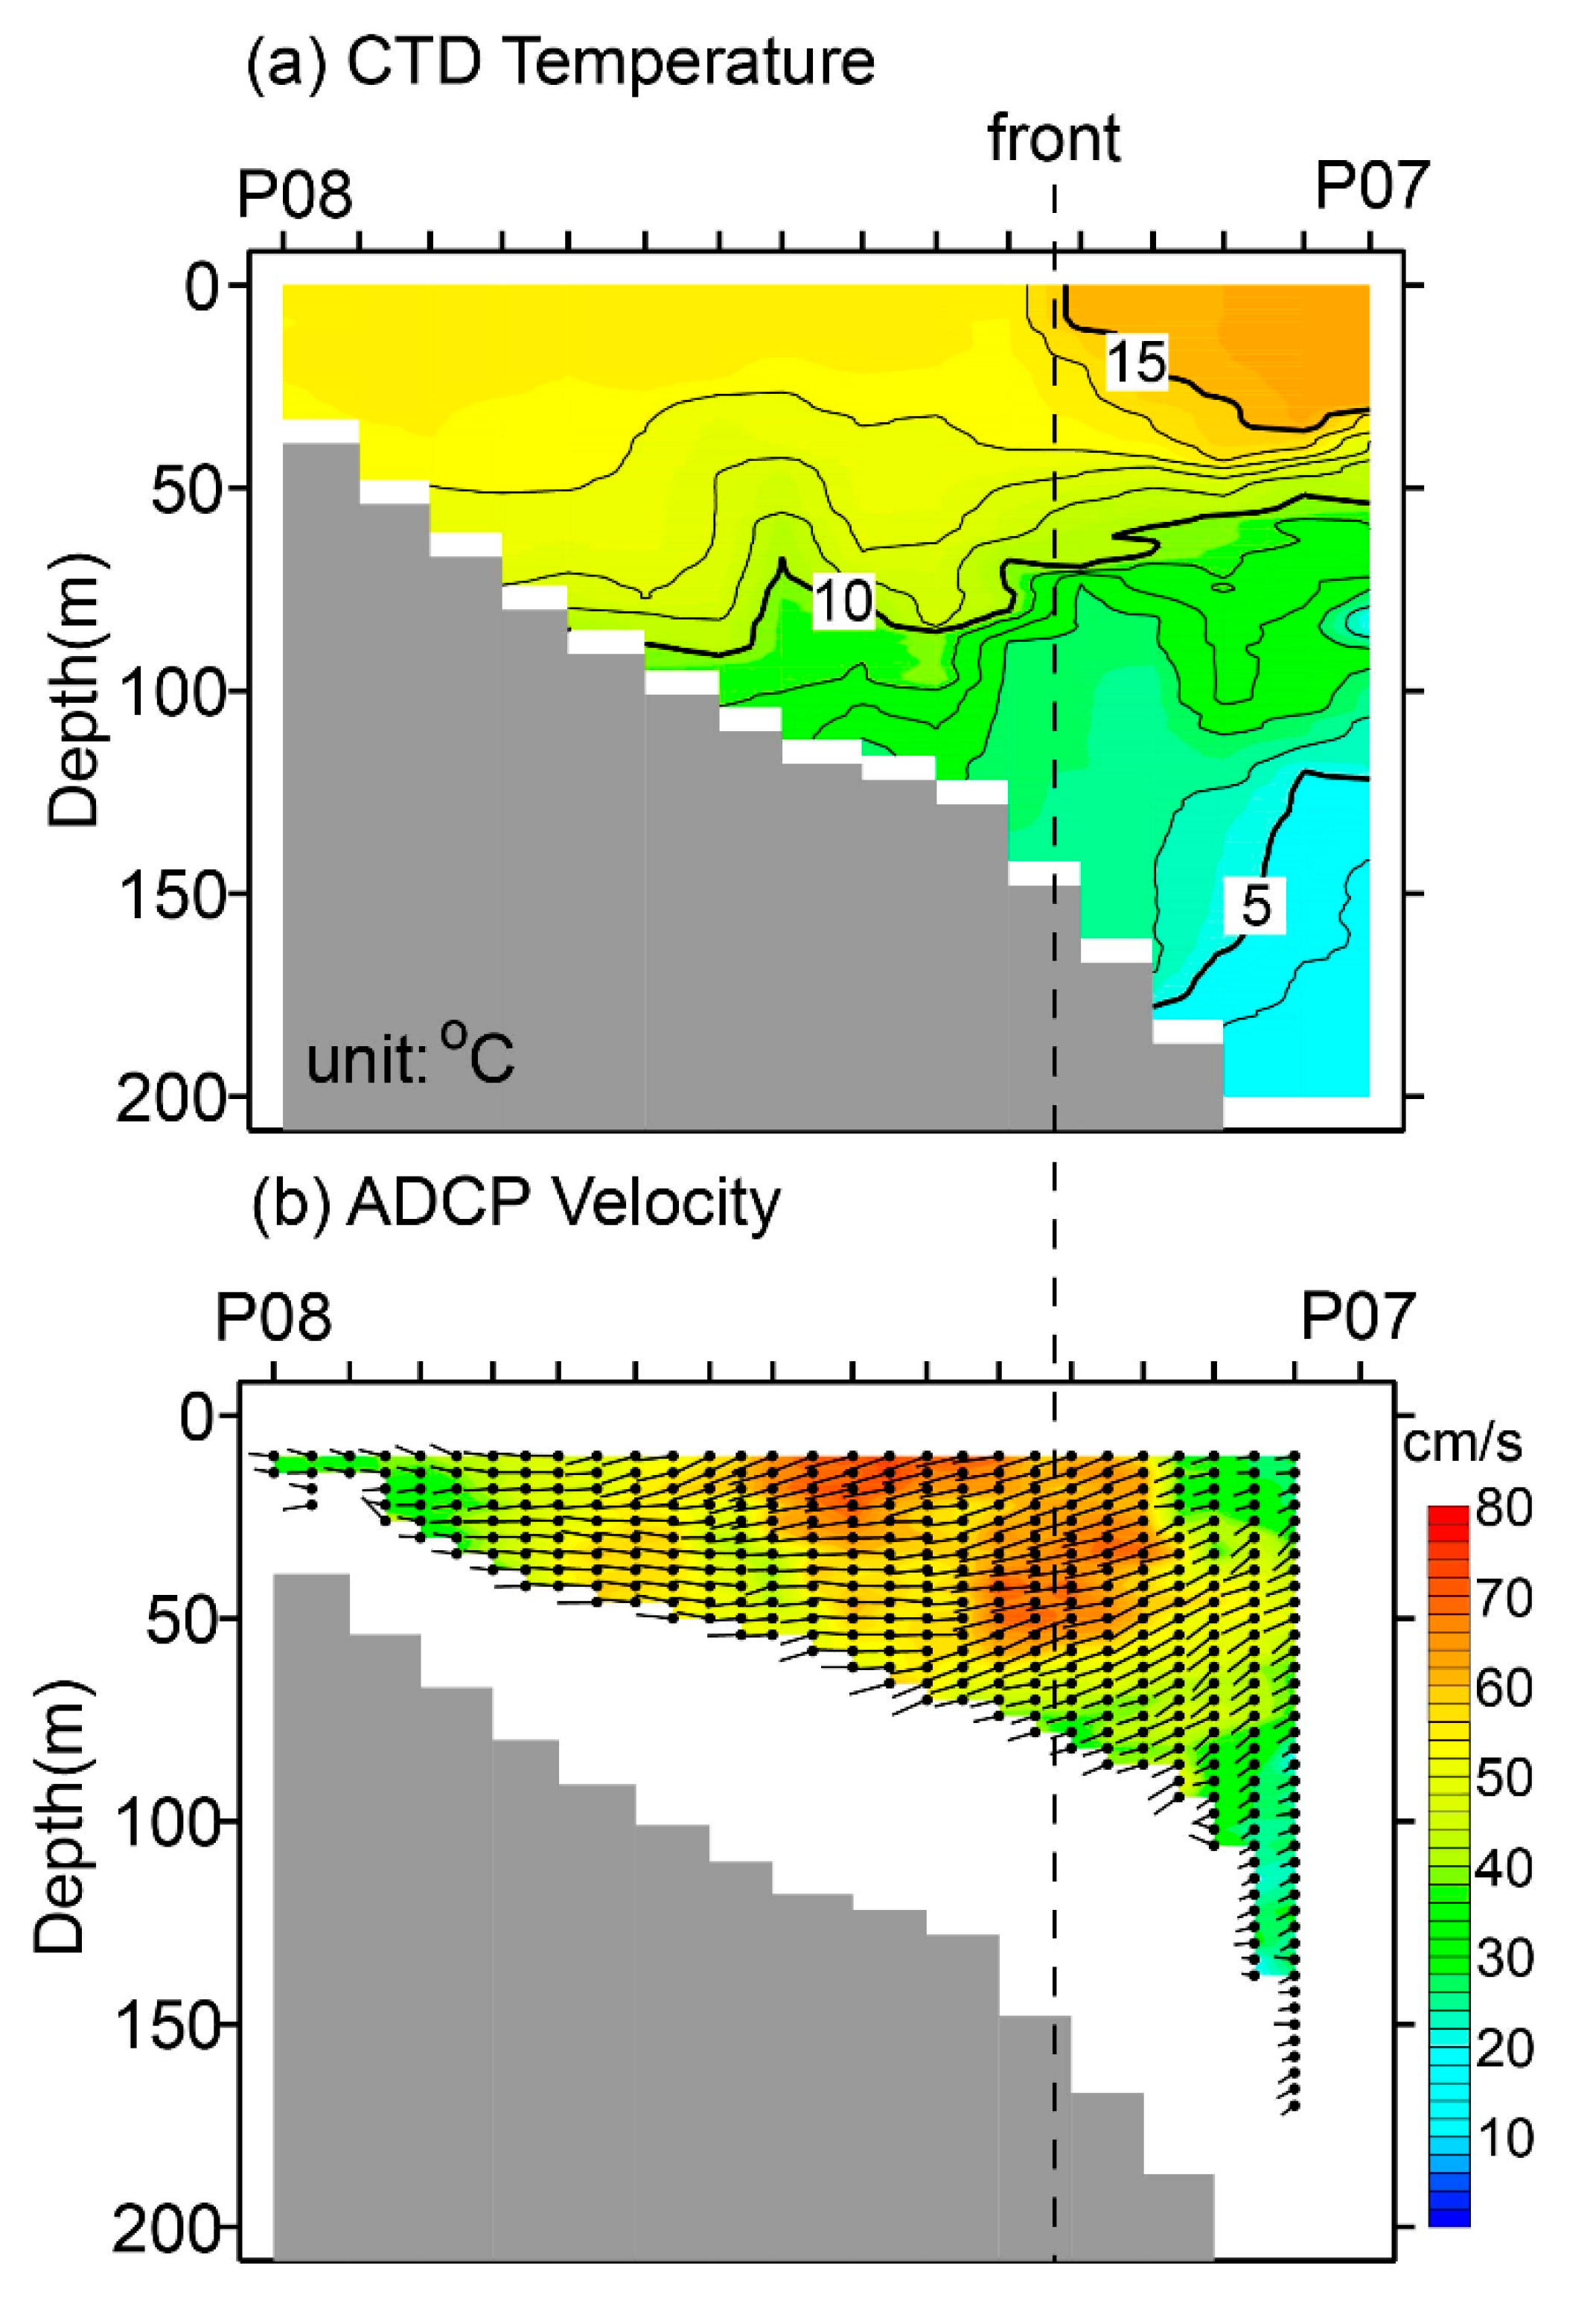 Remote Sensing | Free Full-Text | High-Resolution Sea Surface Temperatures  Derived from Landsat 8: A Study of Submesoscale Frontal Structures on the  Pacific Shelf off the Hokkaido Coast, Japan | HTML